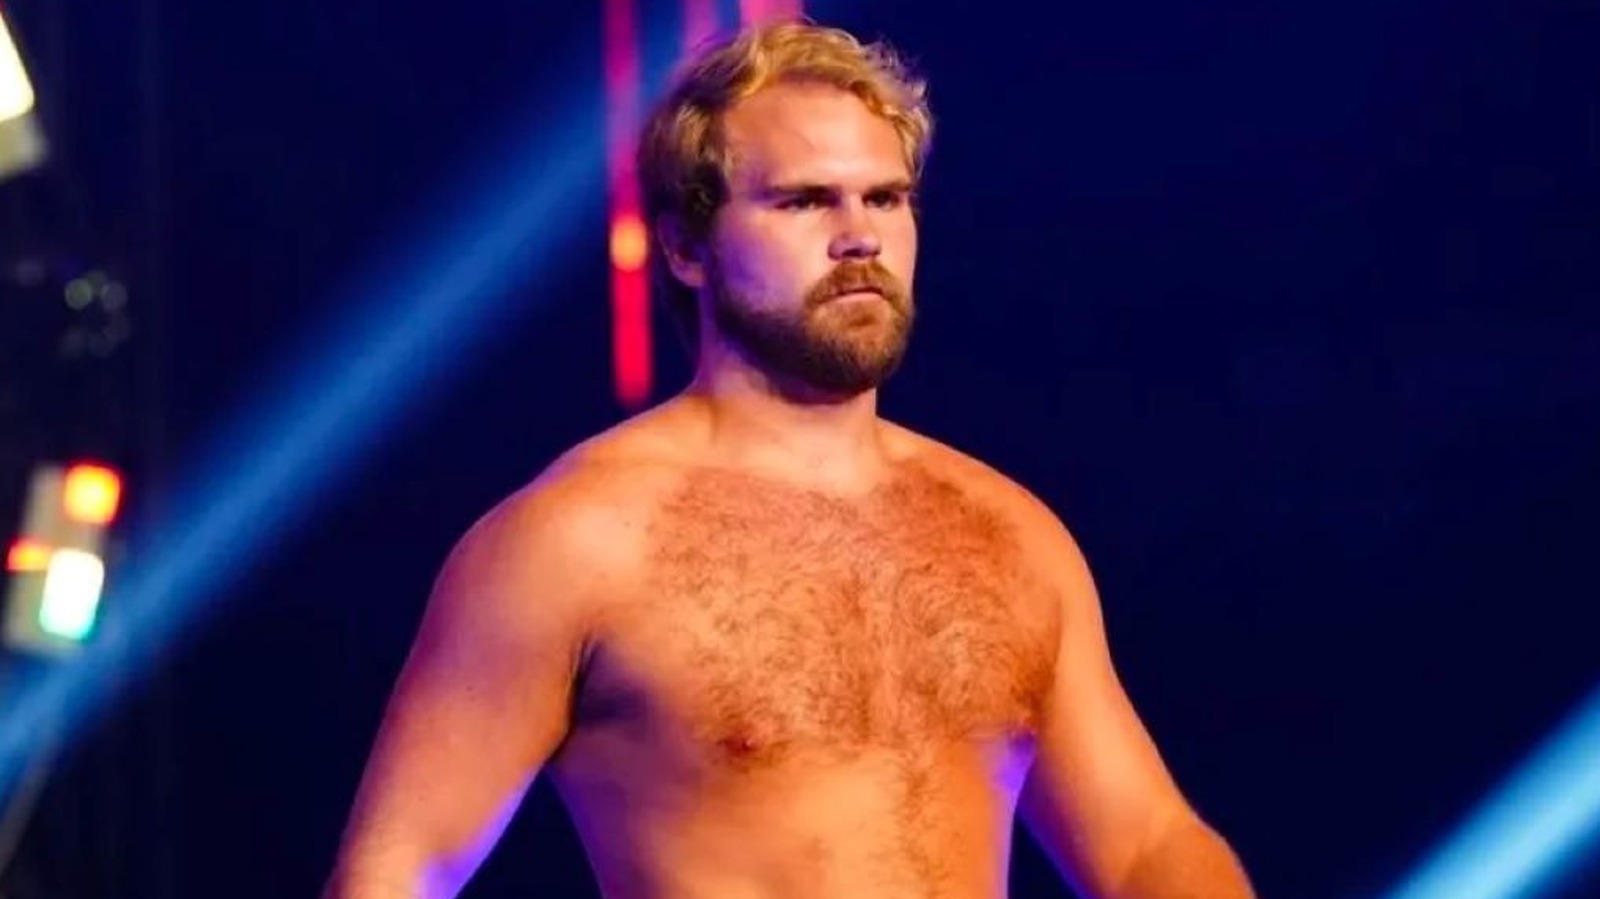 Arn Anderson Comments On What's Next For Son Brock After Leaving AEW